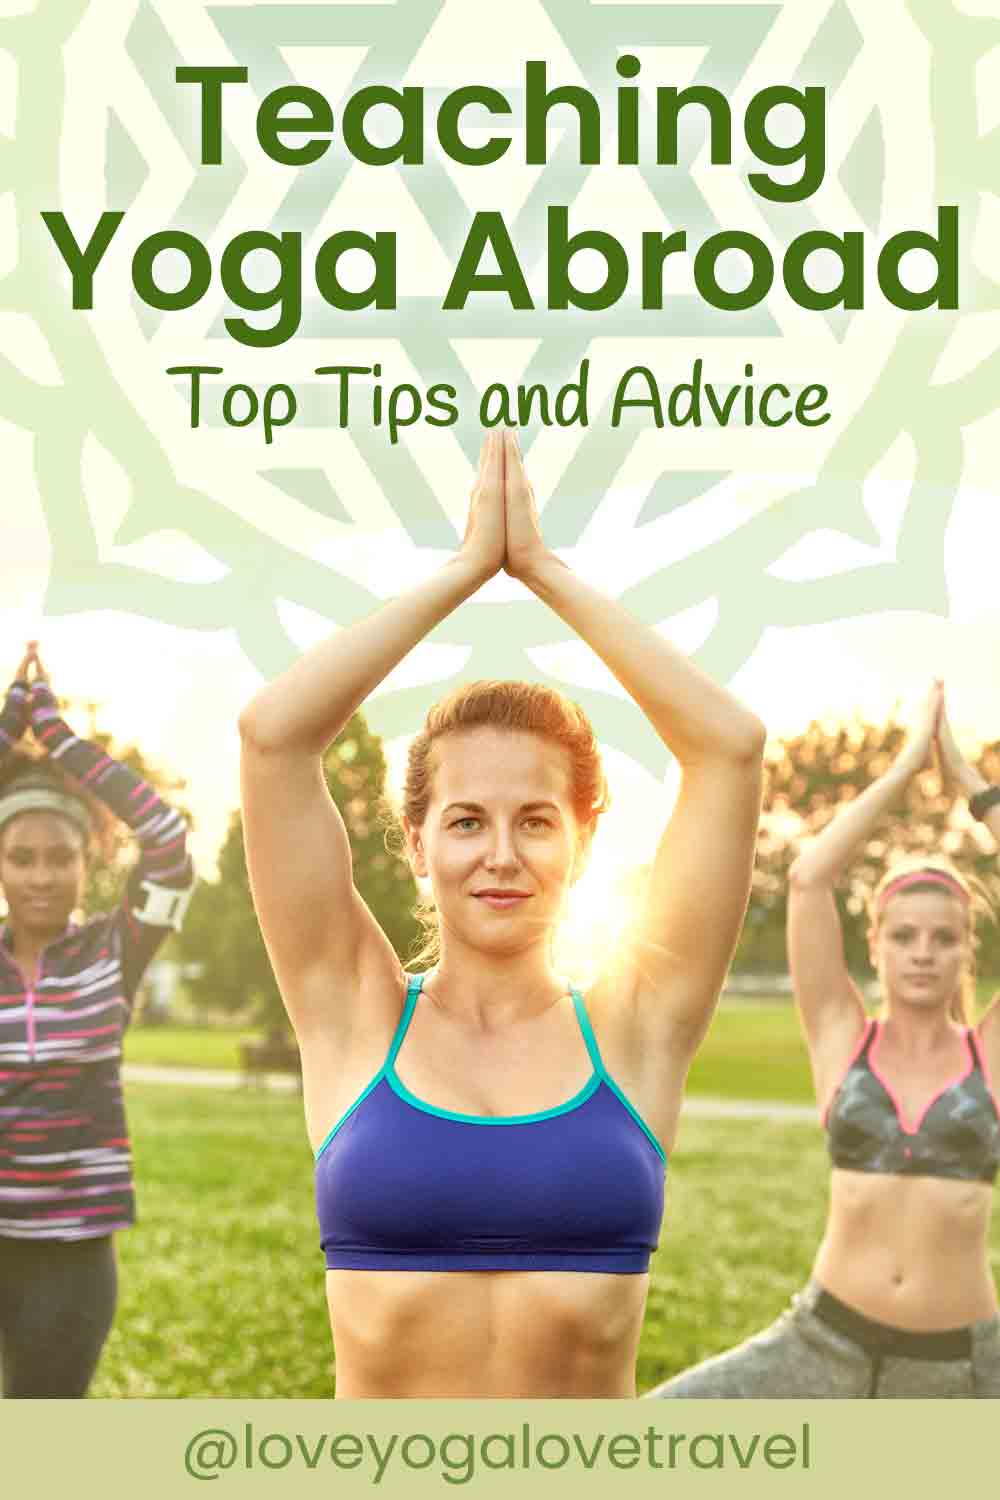 Pin Me! "Top Tips for Teaching Yoga Abroad"